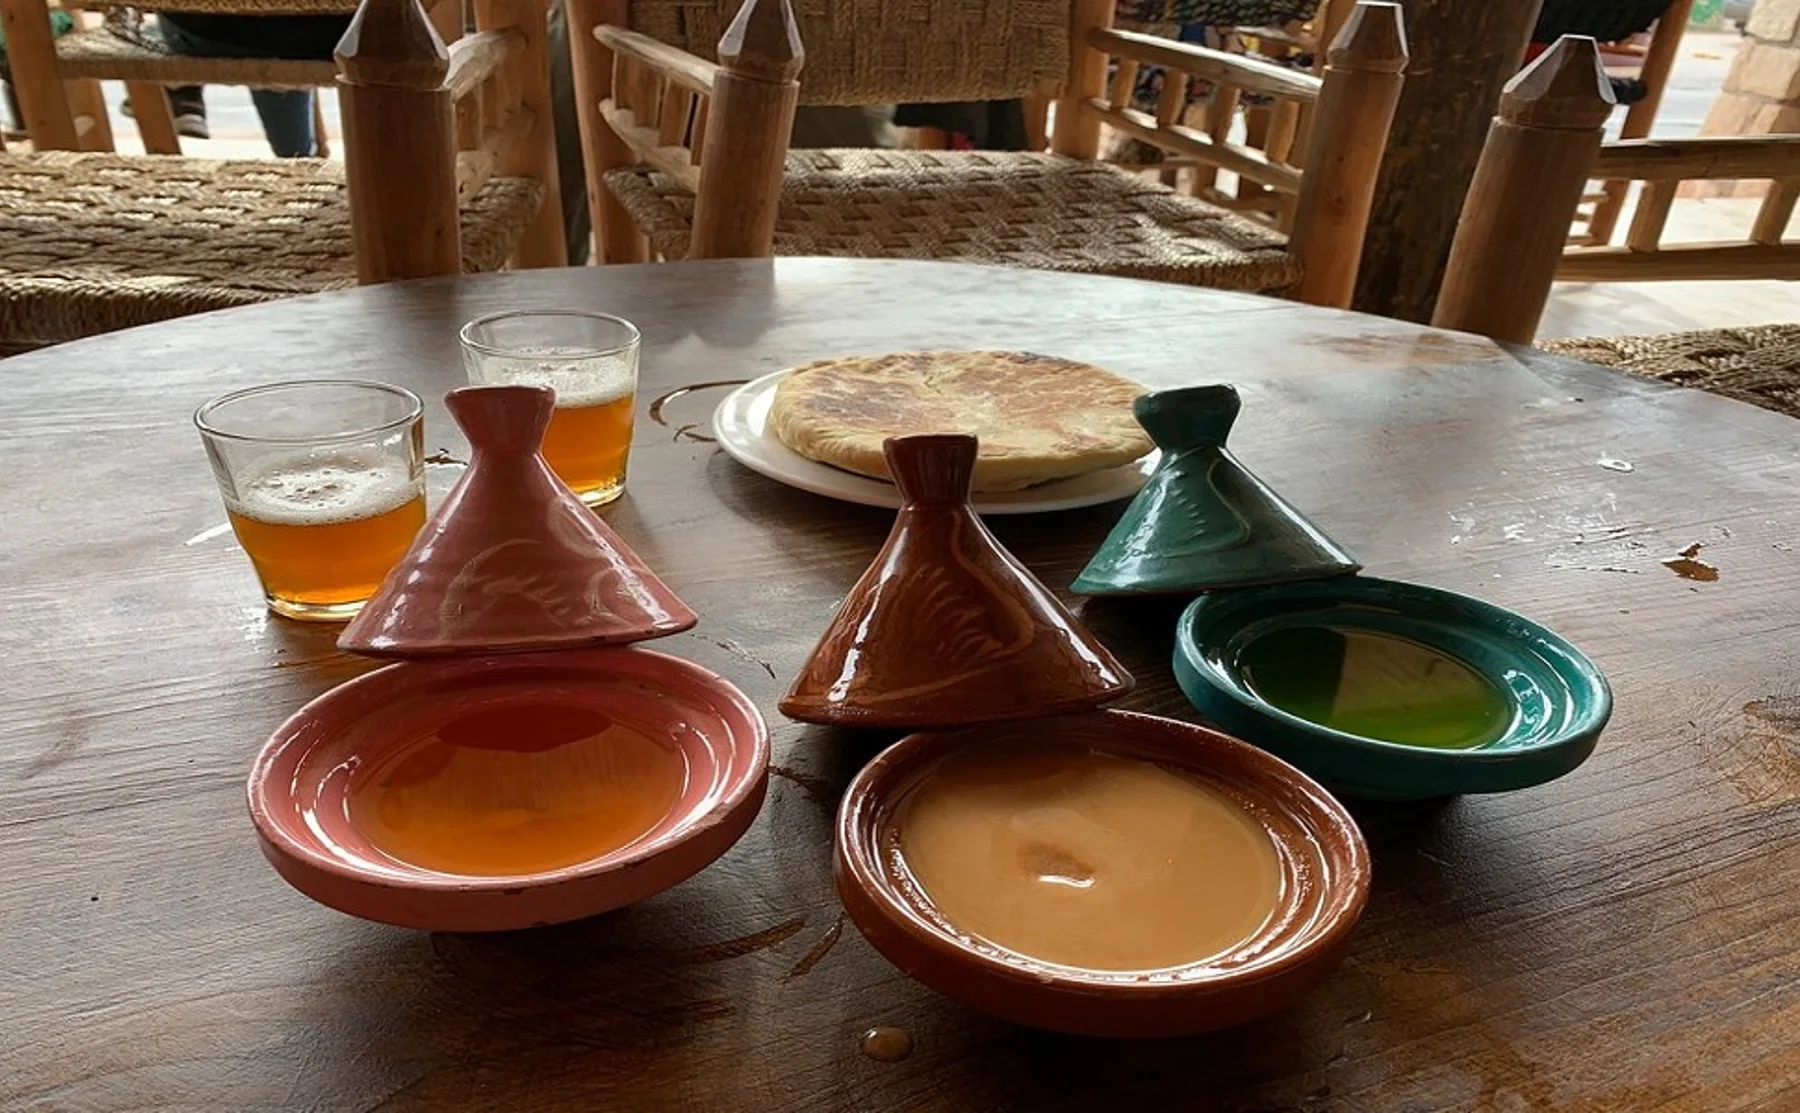 Berber Cuisine Food Tour in the Atlas Mountains - 1424083